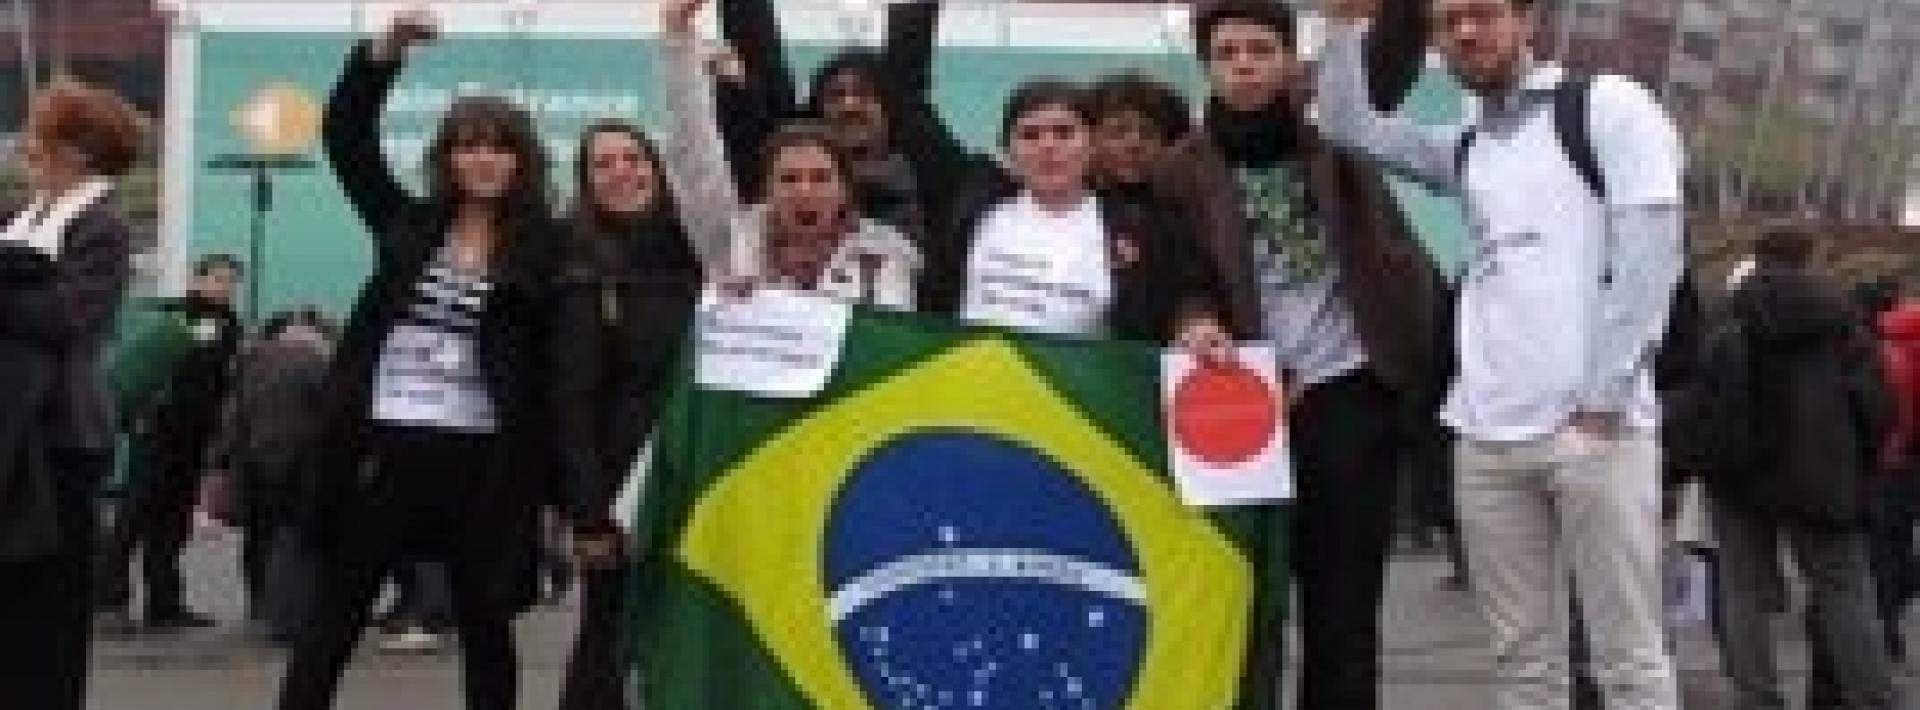 Young activists from Latin America get together in a coalition for climate